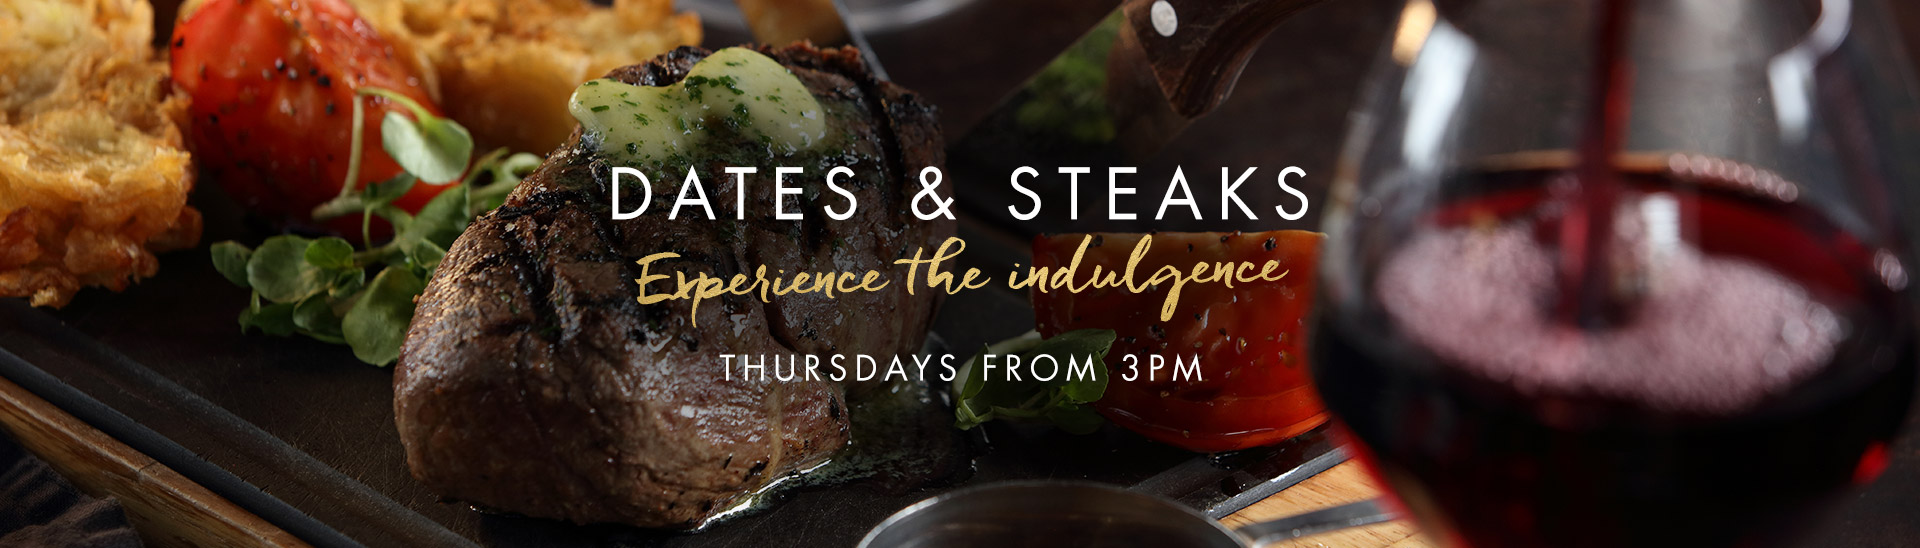 Dates & Steaks at Miller & Carter Cheshire